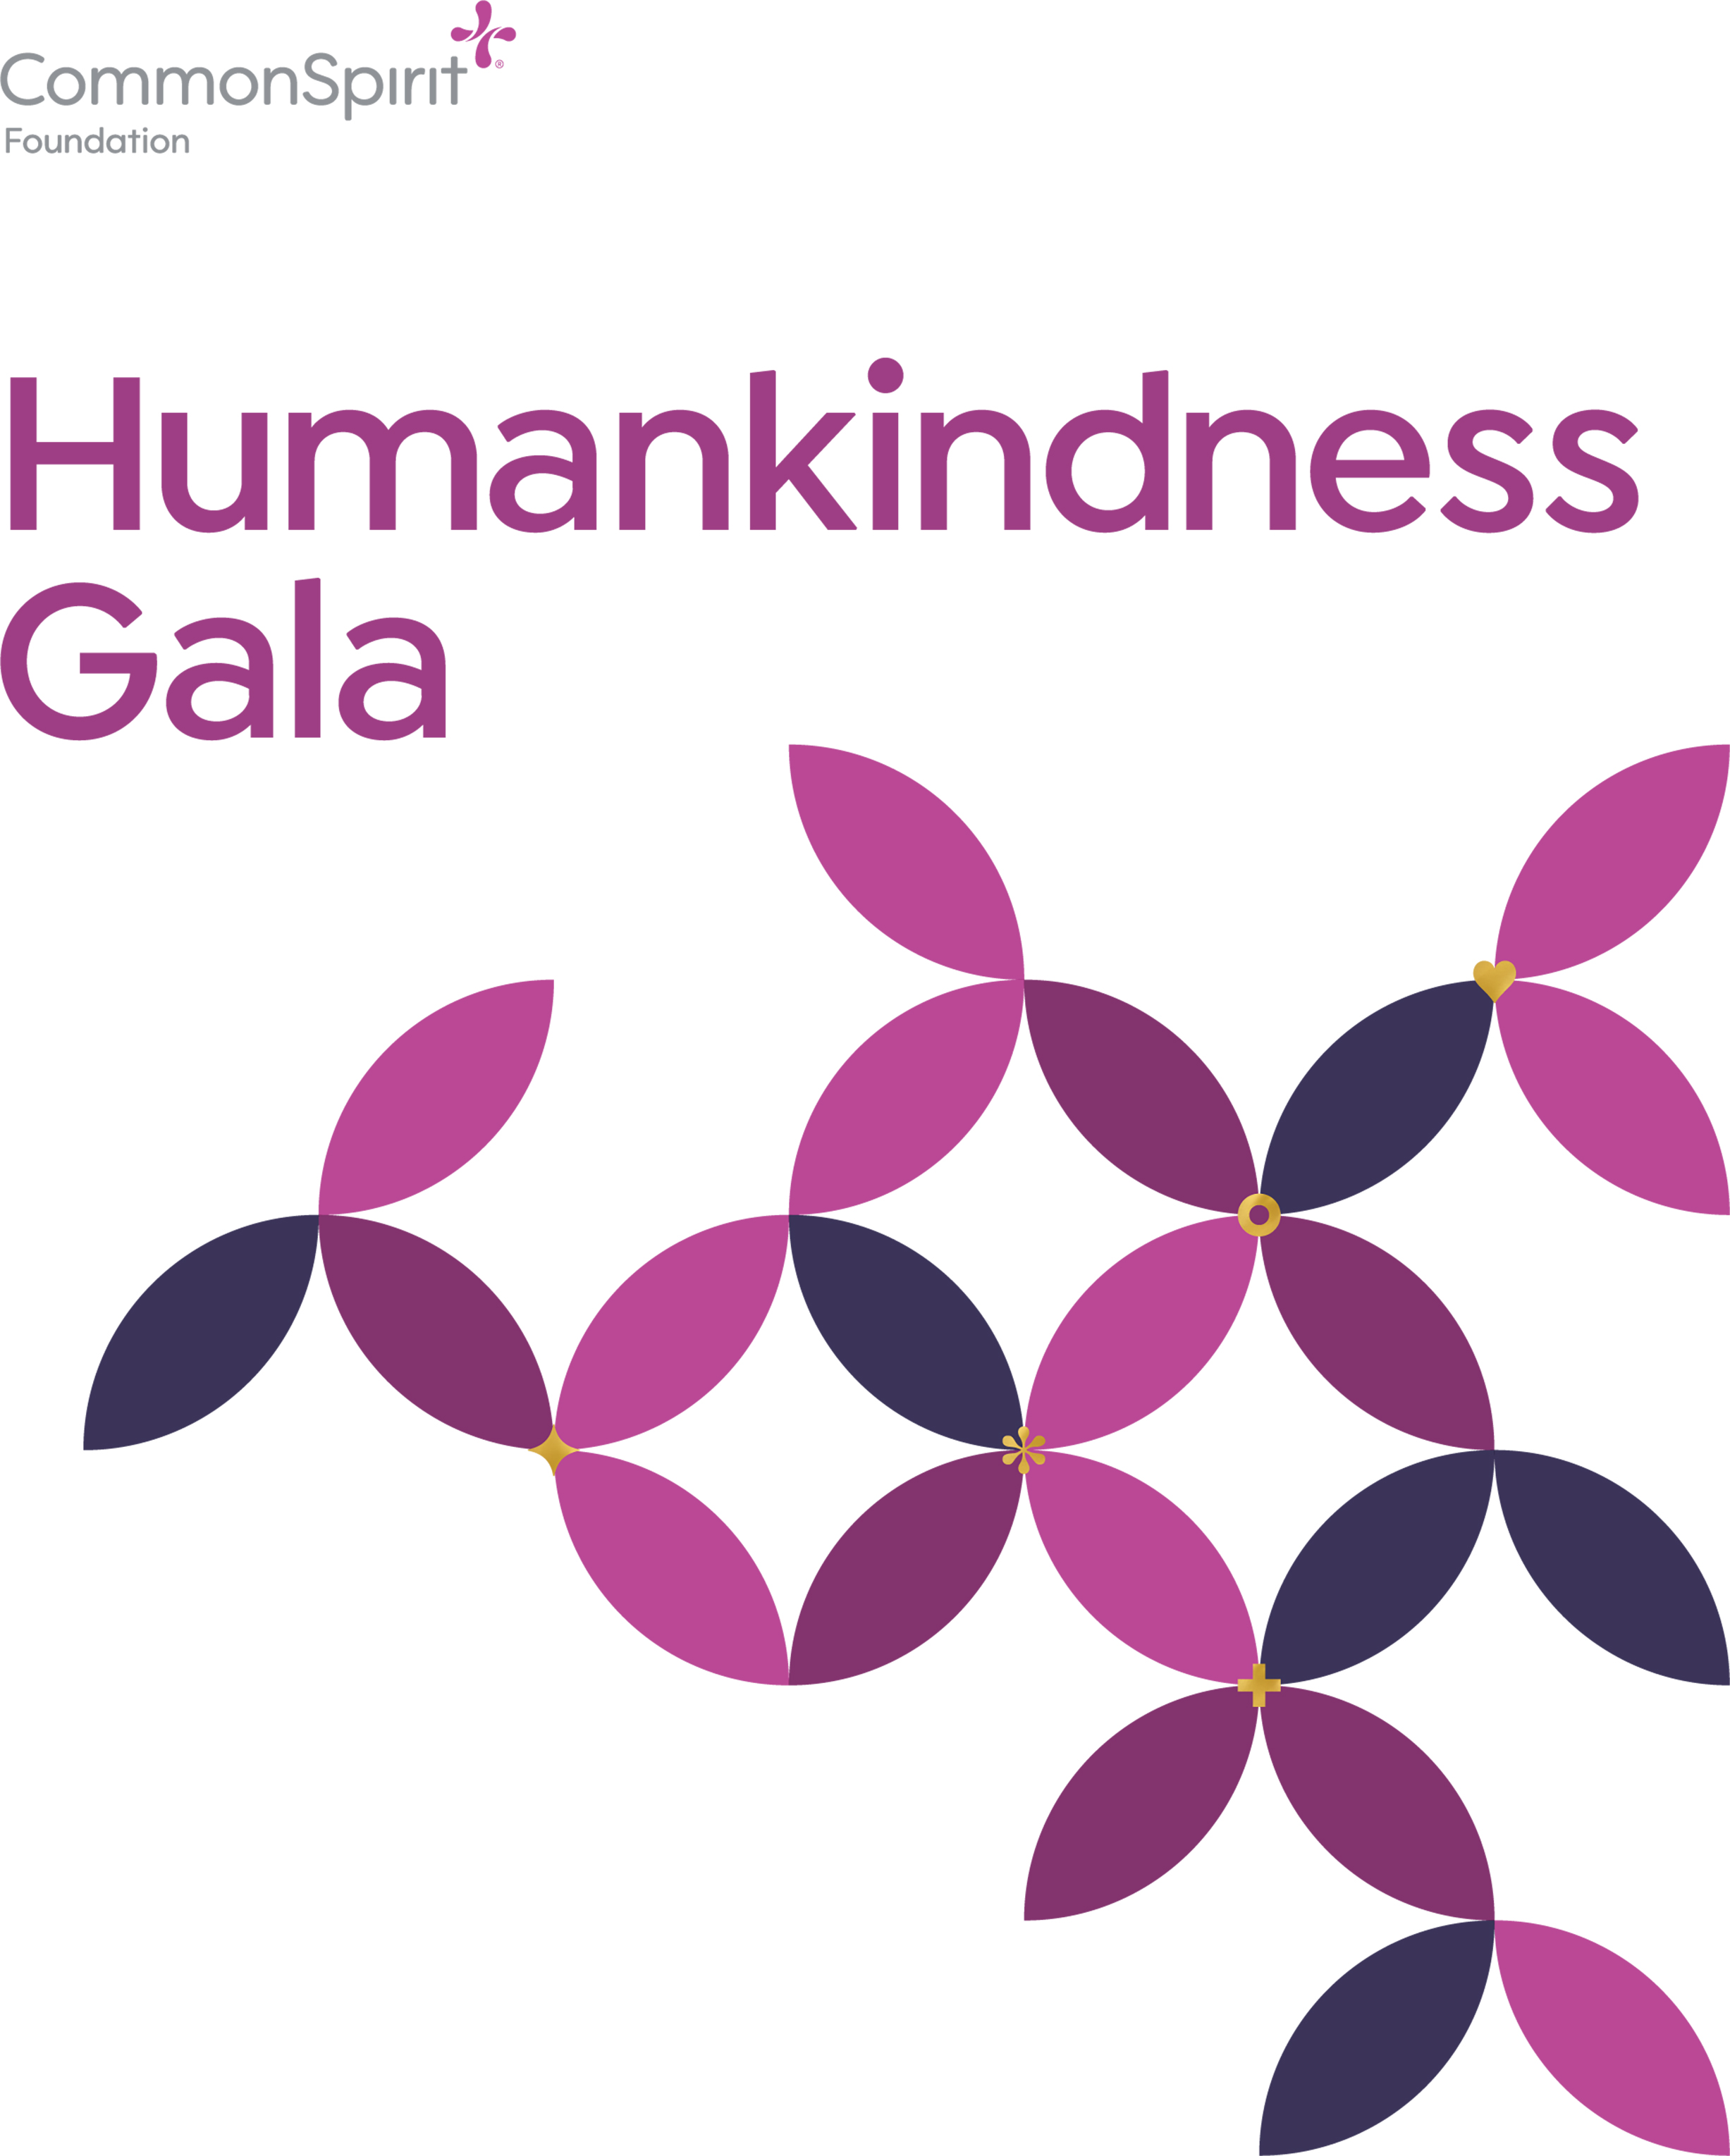 Humankindness Gala name and graphic image.